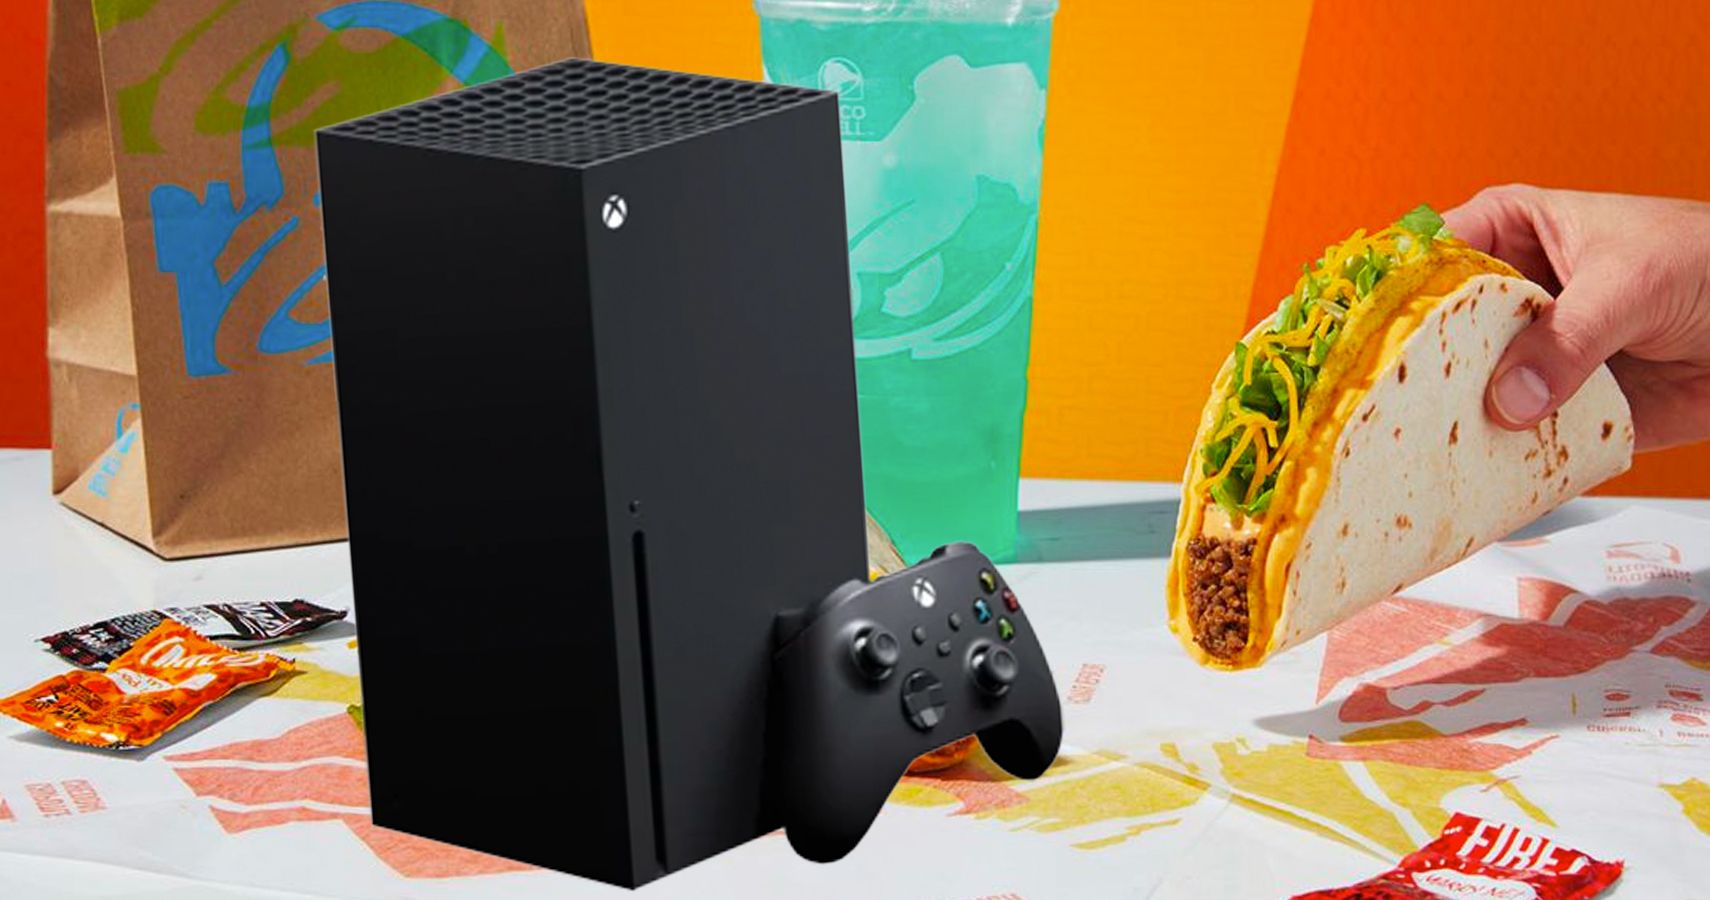 taco bell xbox series x promotion